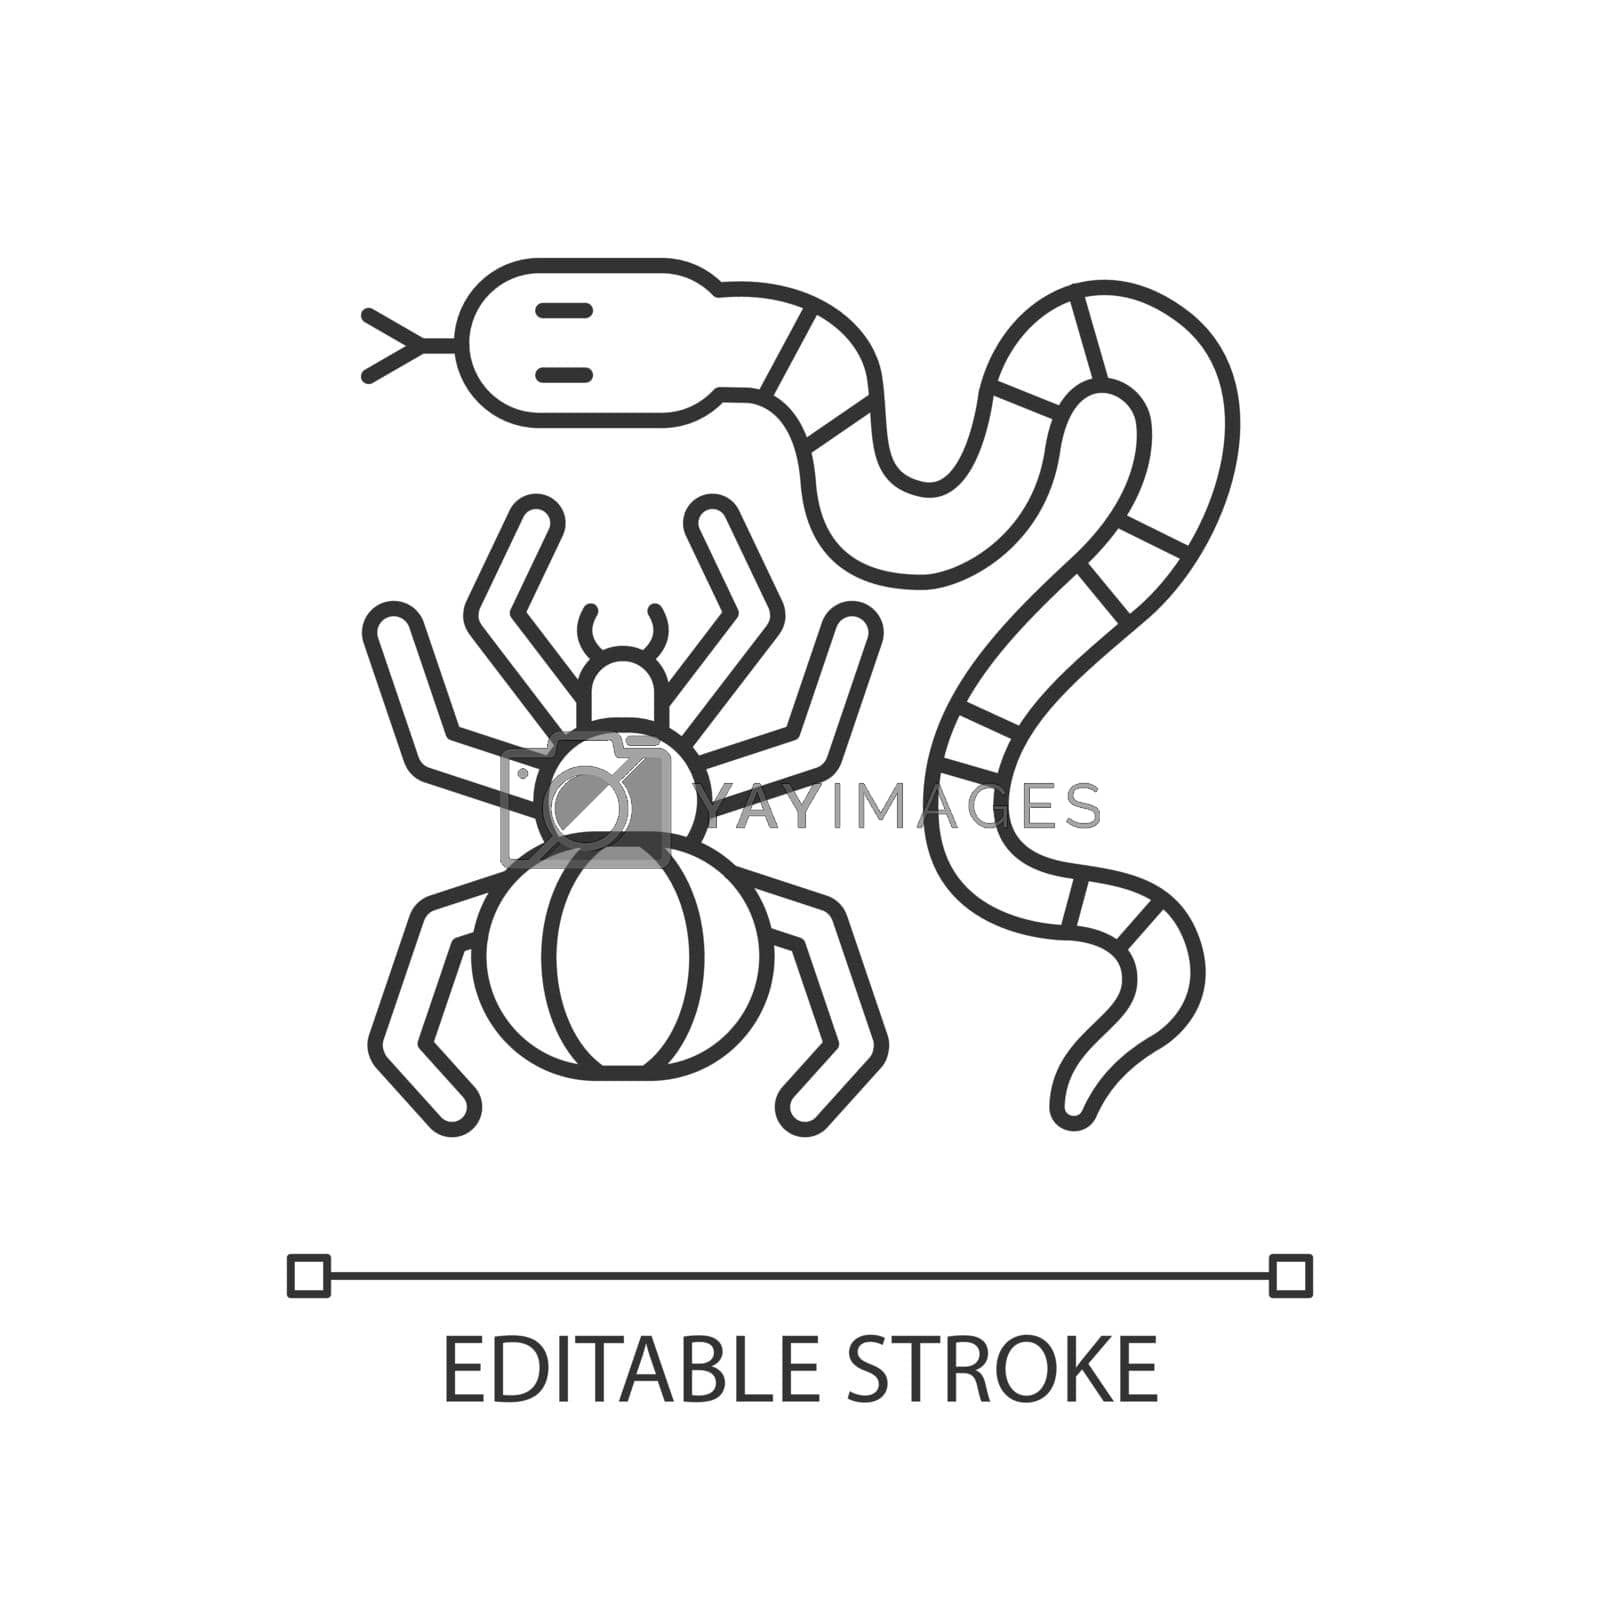 Dangerous animals linear icon. Exotic pets. Poisonous snakes and venomous spiders. Thin line customizable illustration. Contour symbol. Vector isolated outline drawing. Editable stroke